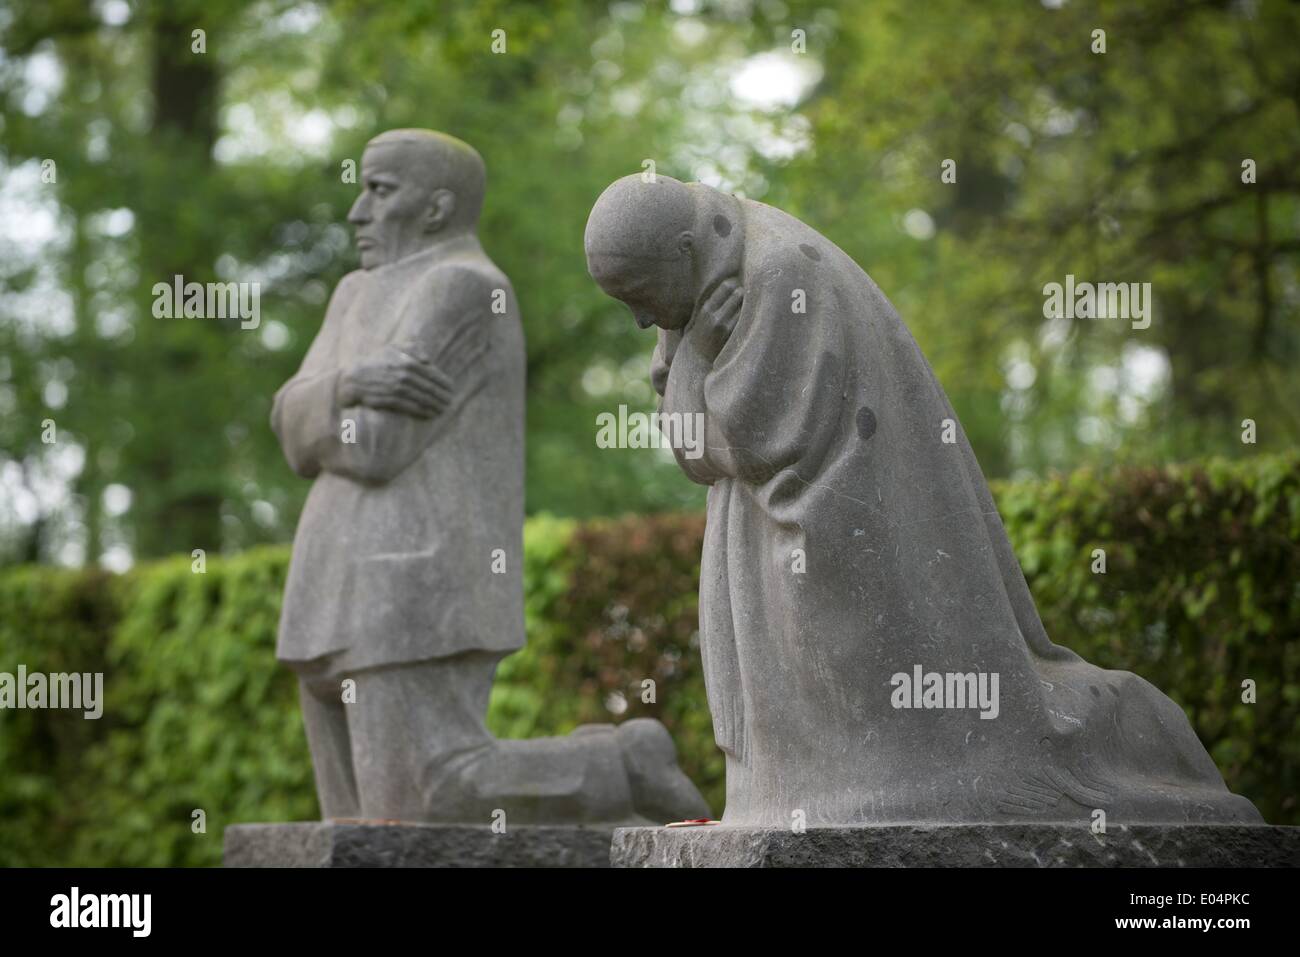 Vladslo, Germany. 22nd Apr, 2014. The sculpture group "Mourning Parents" by Kaethe Kollwitz is pictured at the German WWI military cemetery in Vladslo, Germany, 22 April 2014. More than 25,000 Germans are buried there. Photo: Uwu Zucchi/dpa/Alamy Live News Stock Photo